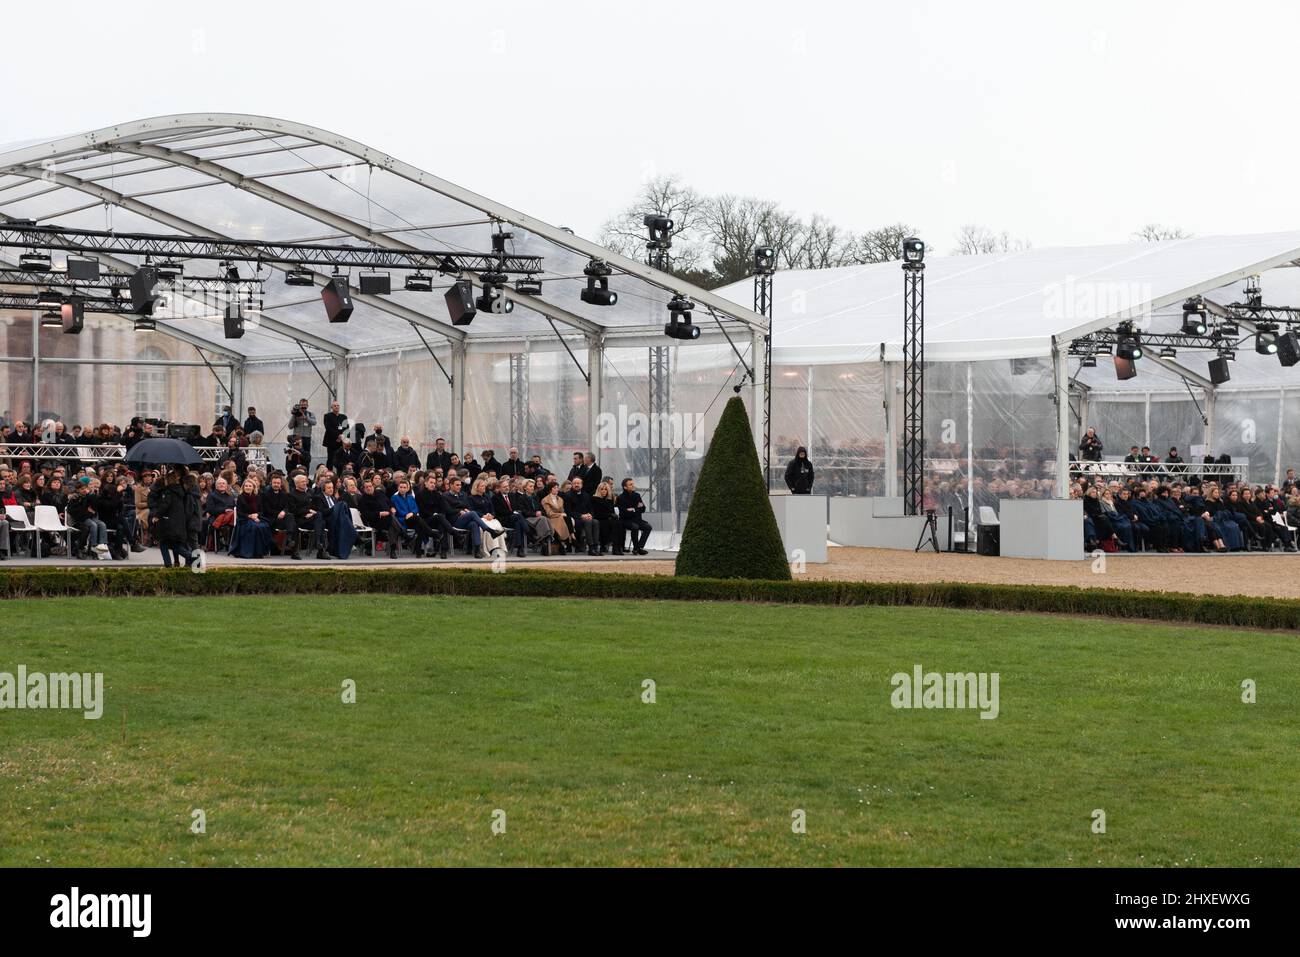 Ceremony for the national and European day in tribute to the victims of terrorism at the Grand Trianon in Versailles, France on March 11, 2022. The date of March 11, chosen by the European Union as the date of joint commemoration, refers to the attack committed at the Atocha train station in Madrid on March 11, 2004. Photo by Jeanne Accorsini/Pool/ABACAPRESS.COM Stock Photo